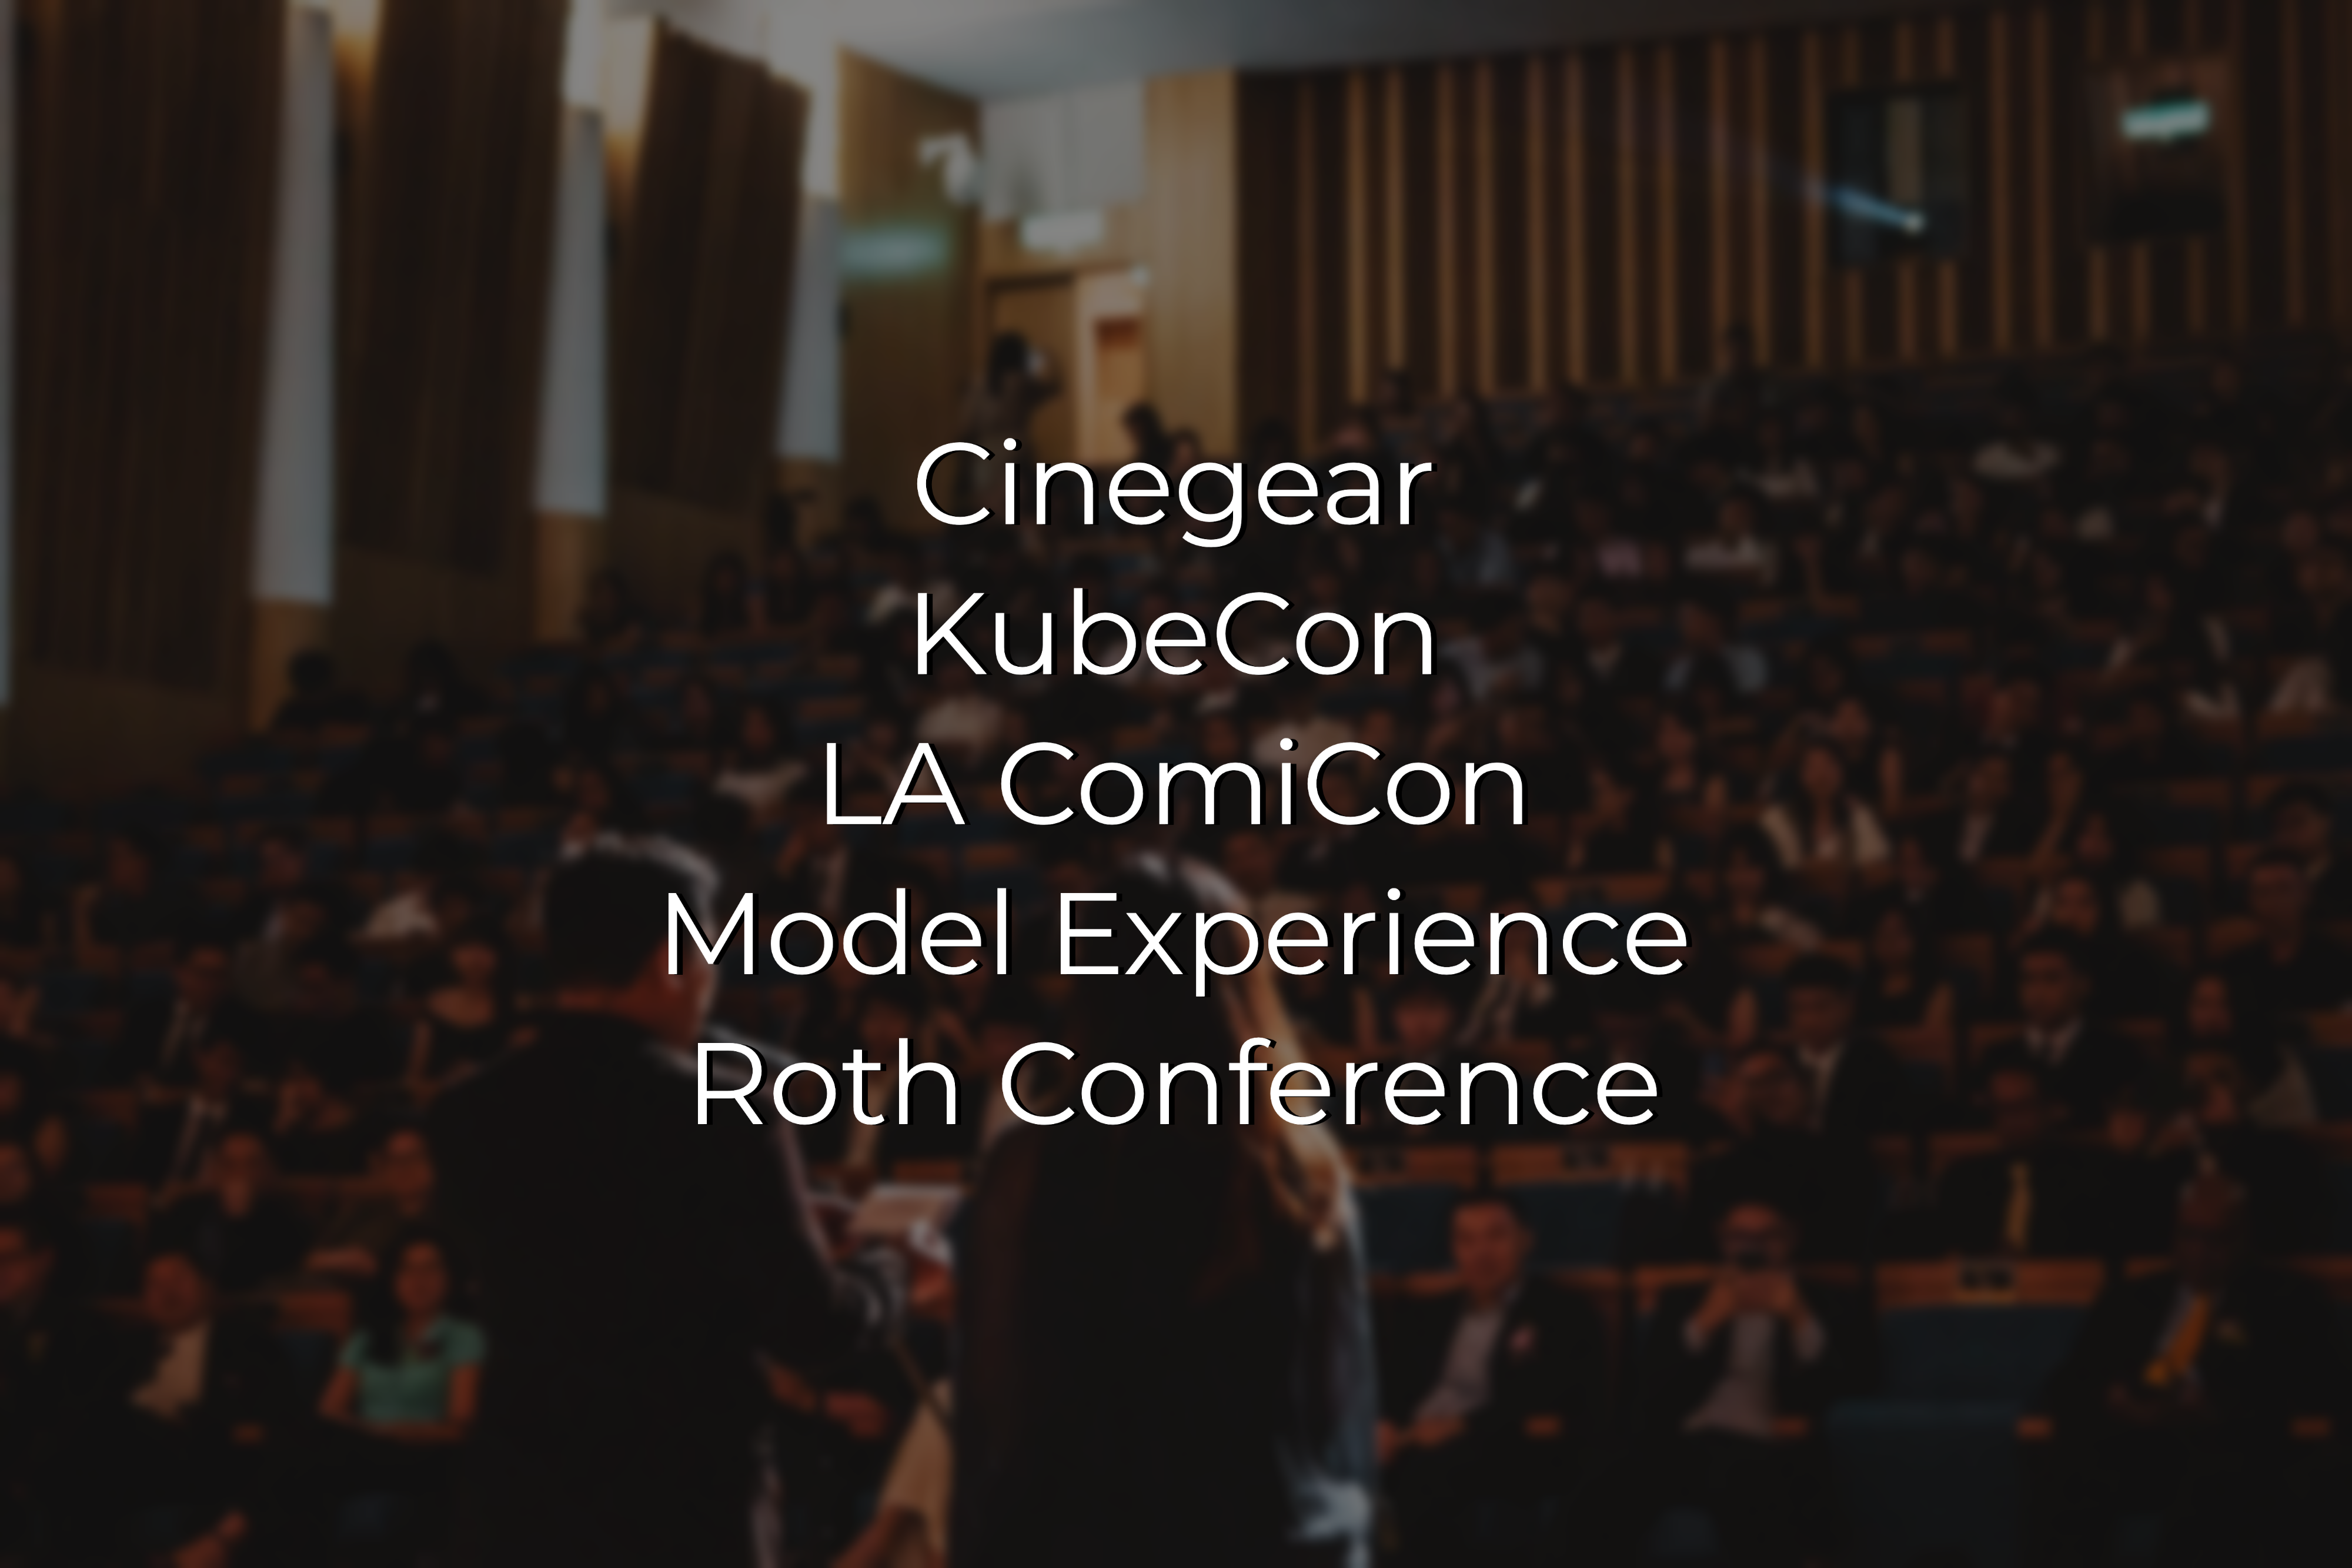 Conference list